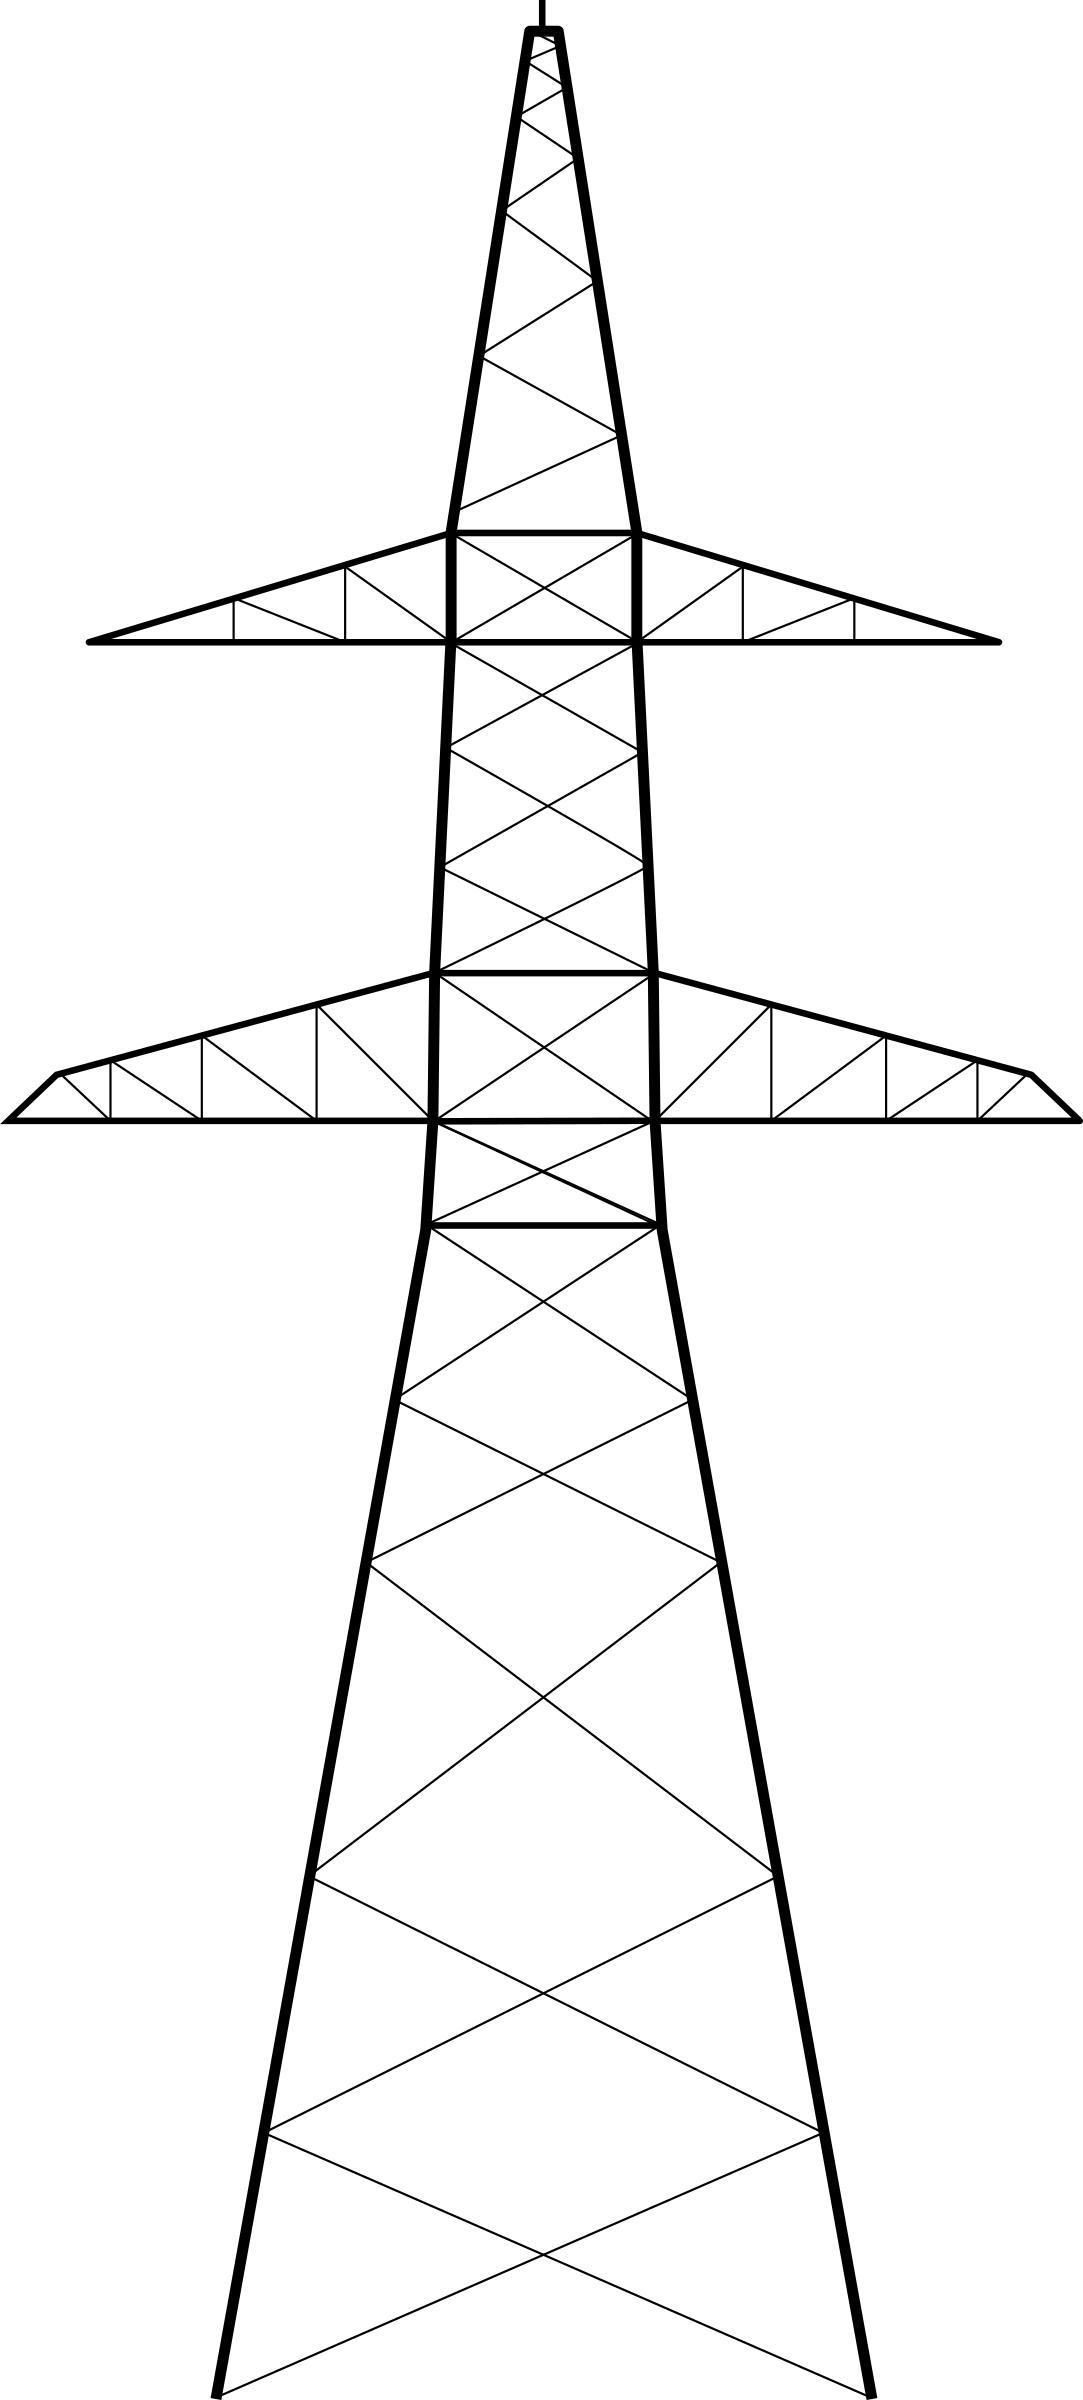 Transmission tower by Rones png